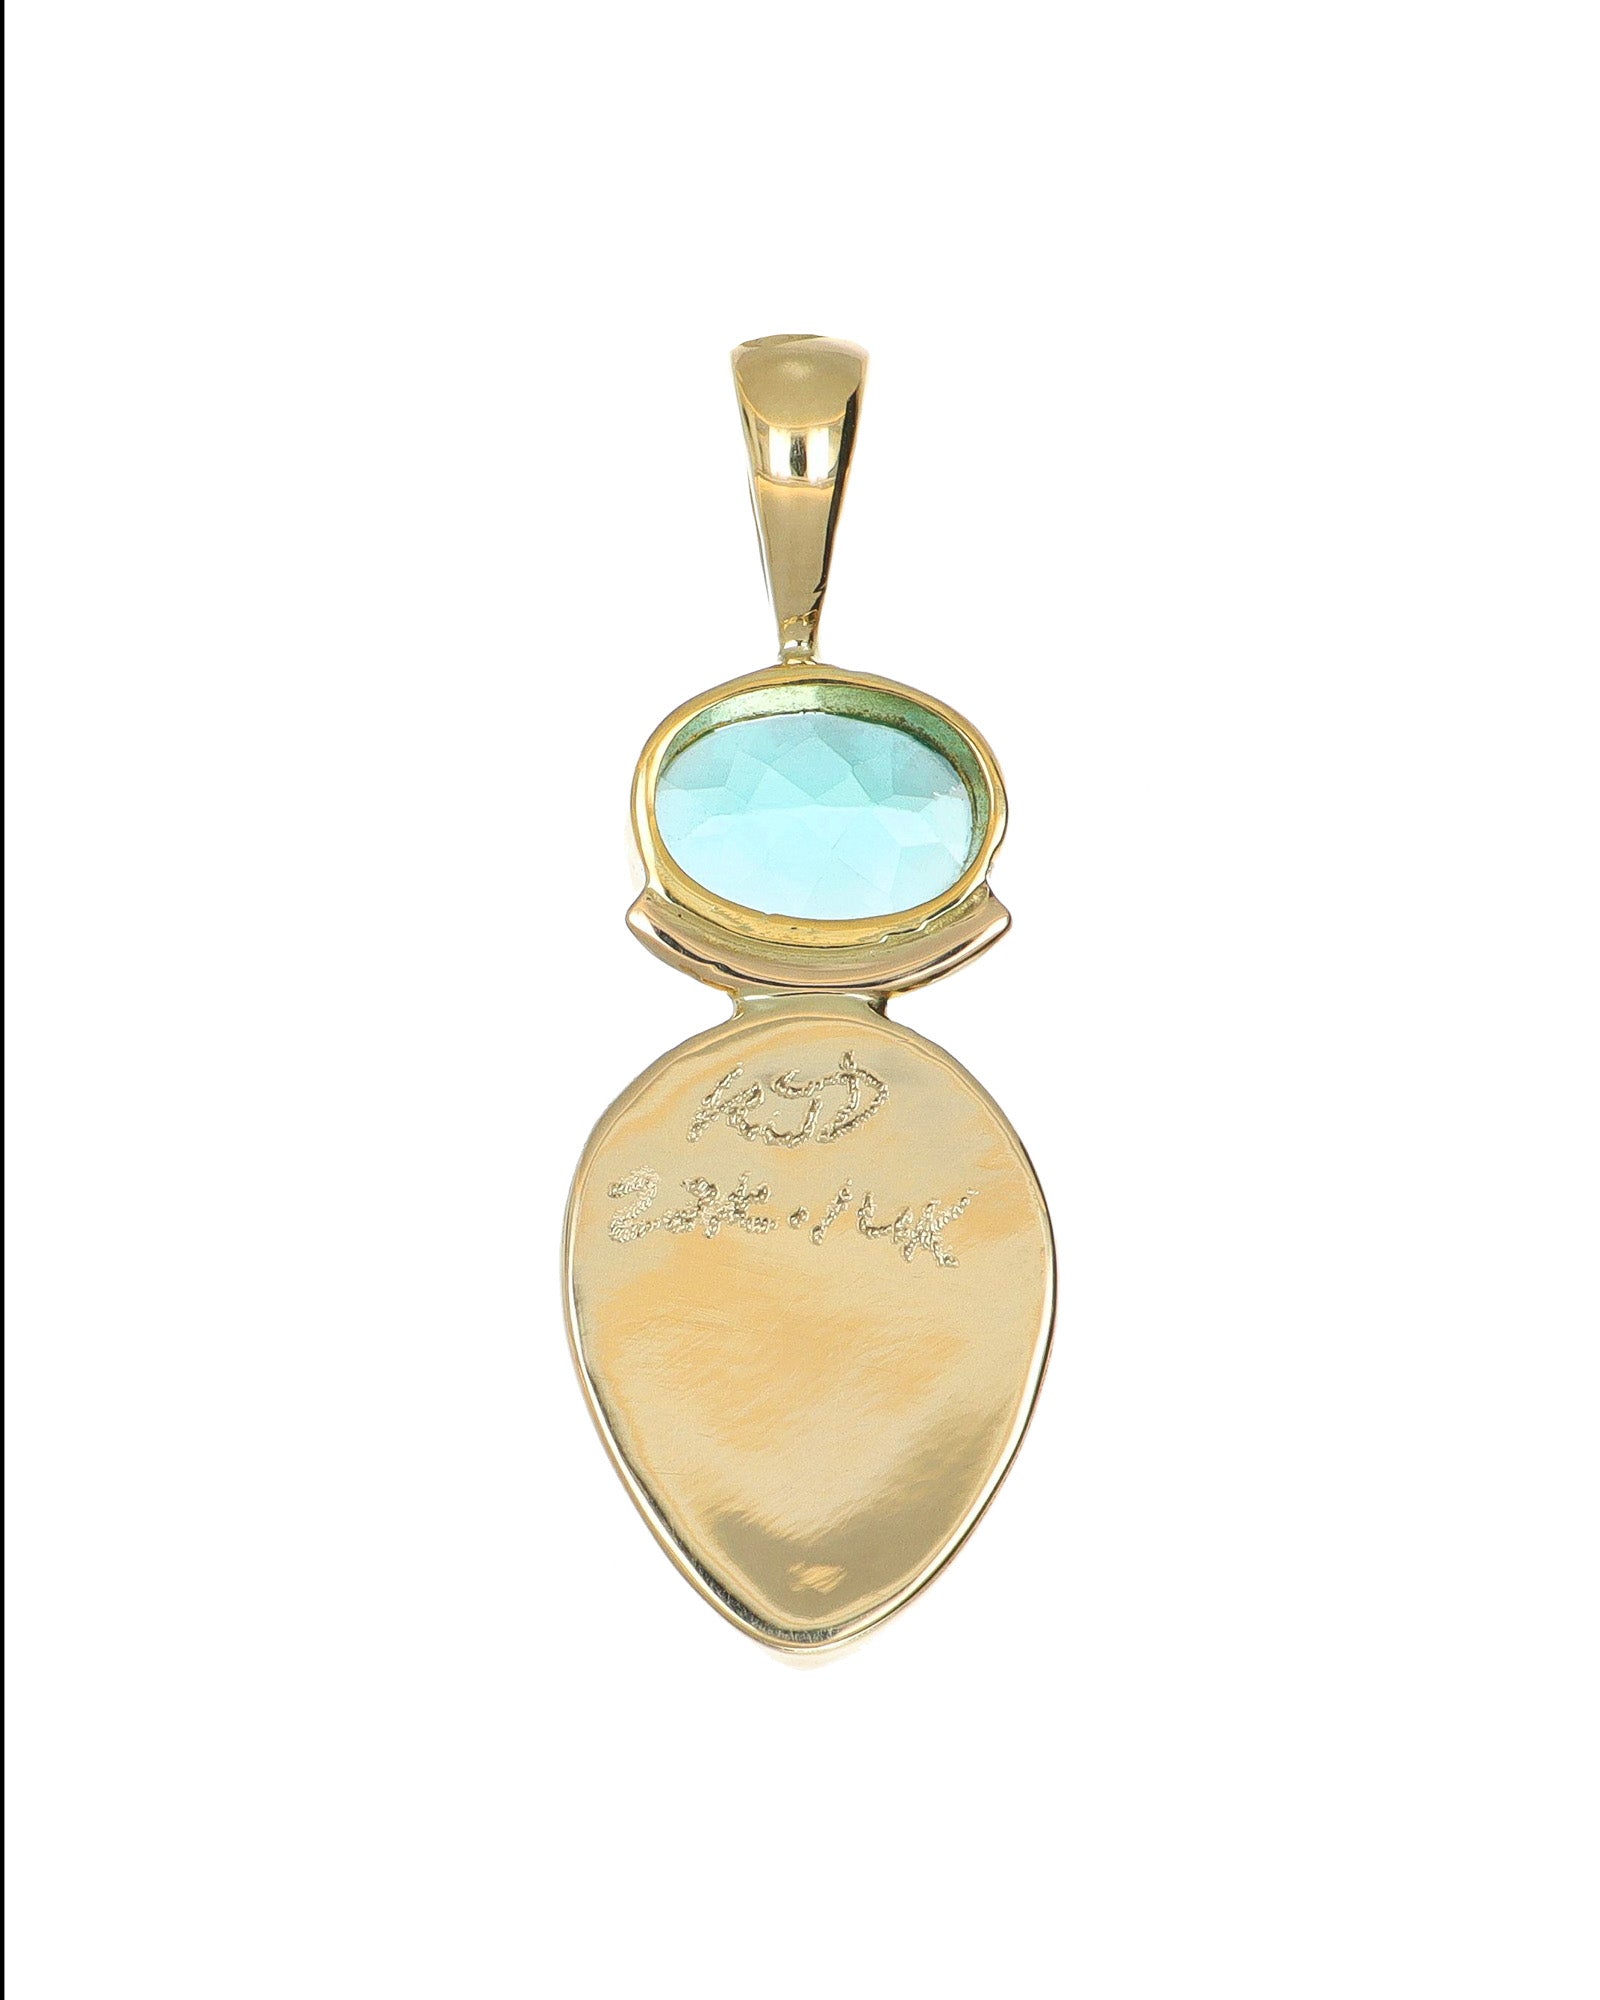 Opal and Apatite Pendant